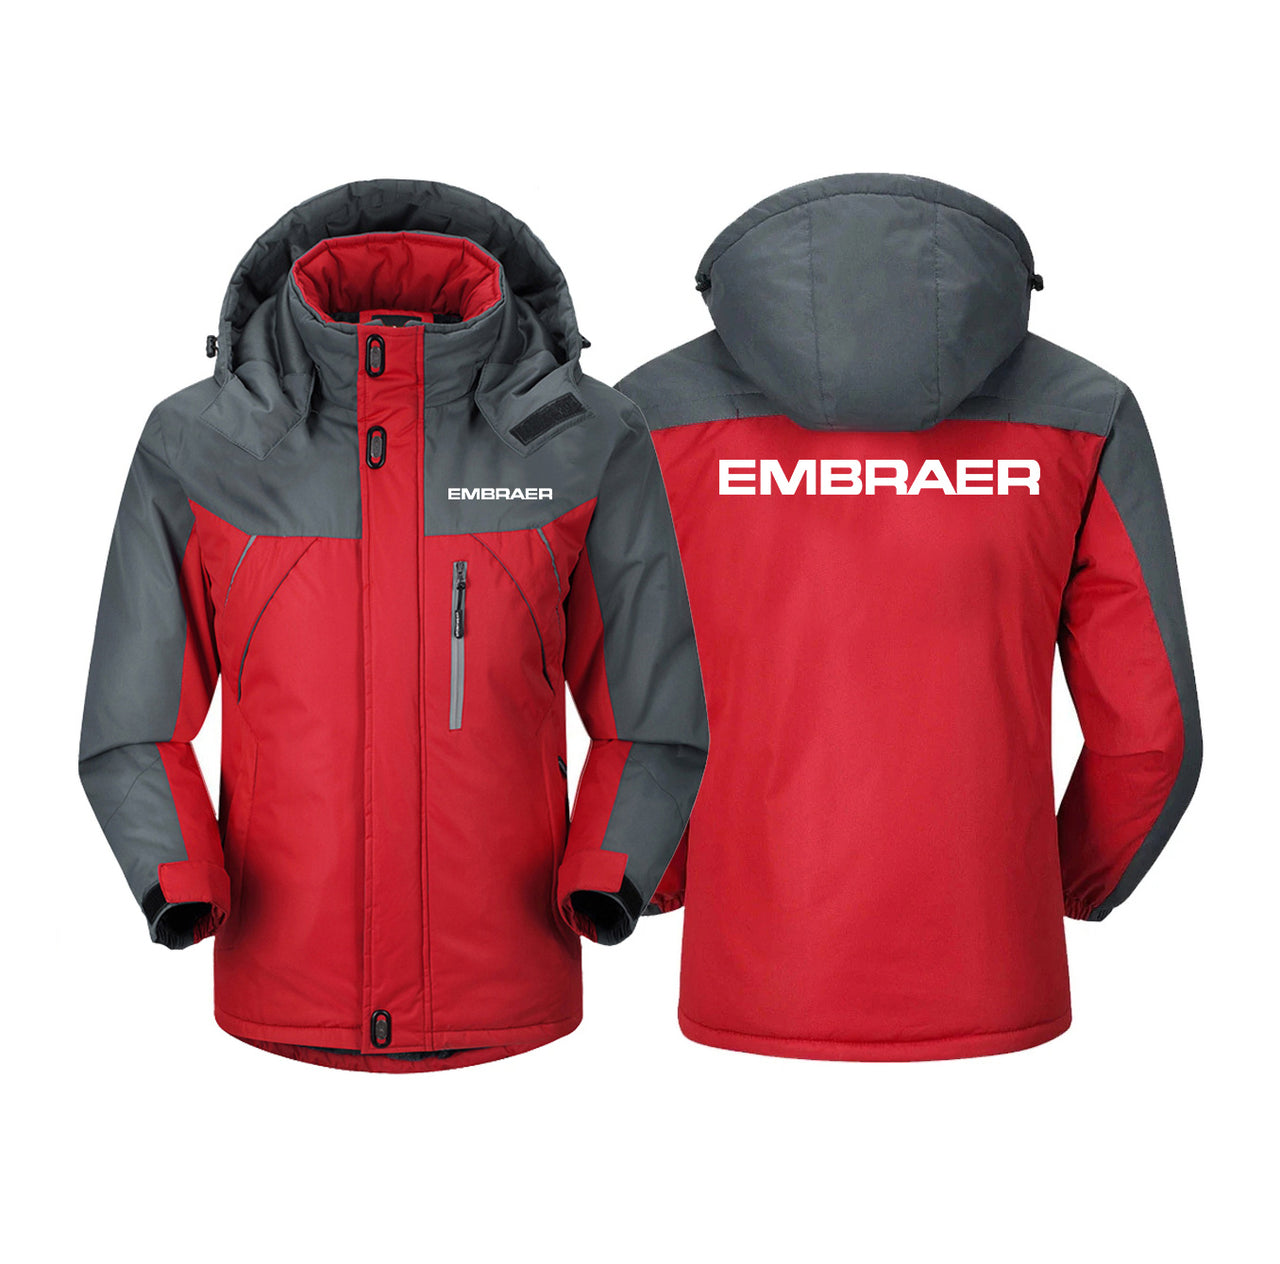 Embraer & Text Designed Thick Winter Jackets